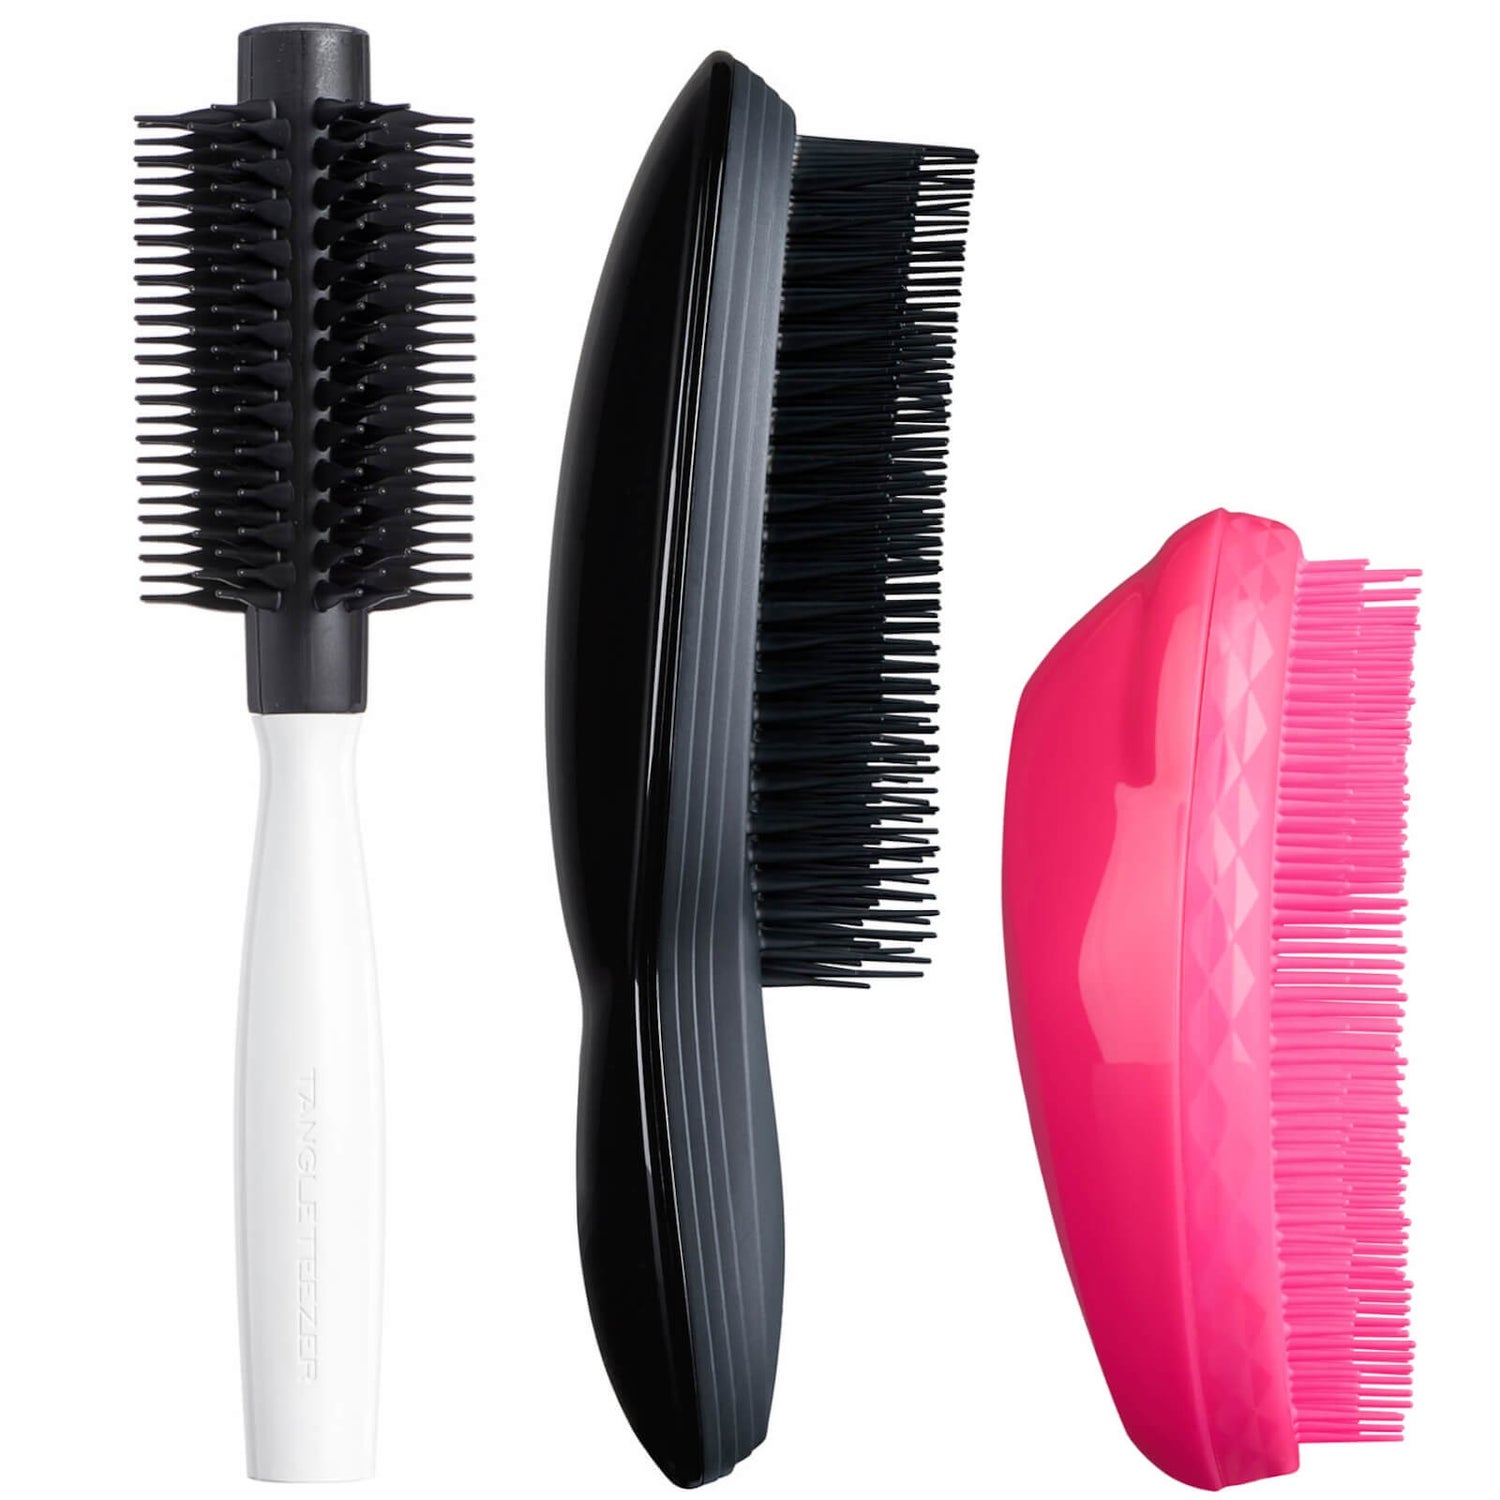  Tangle Teezer The Ultimate Detangling Brush, Dry and